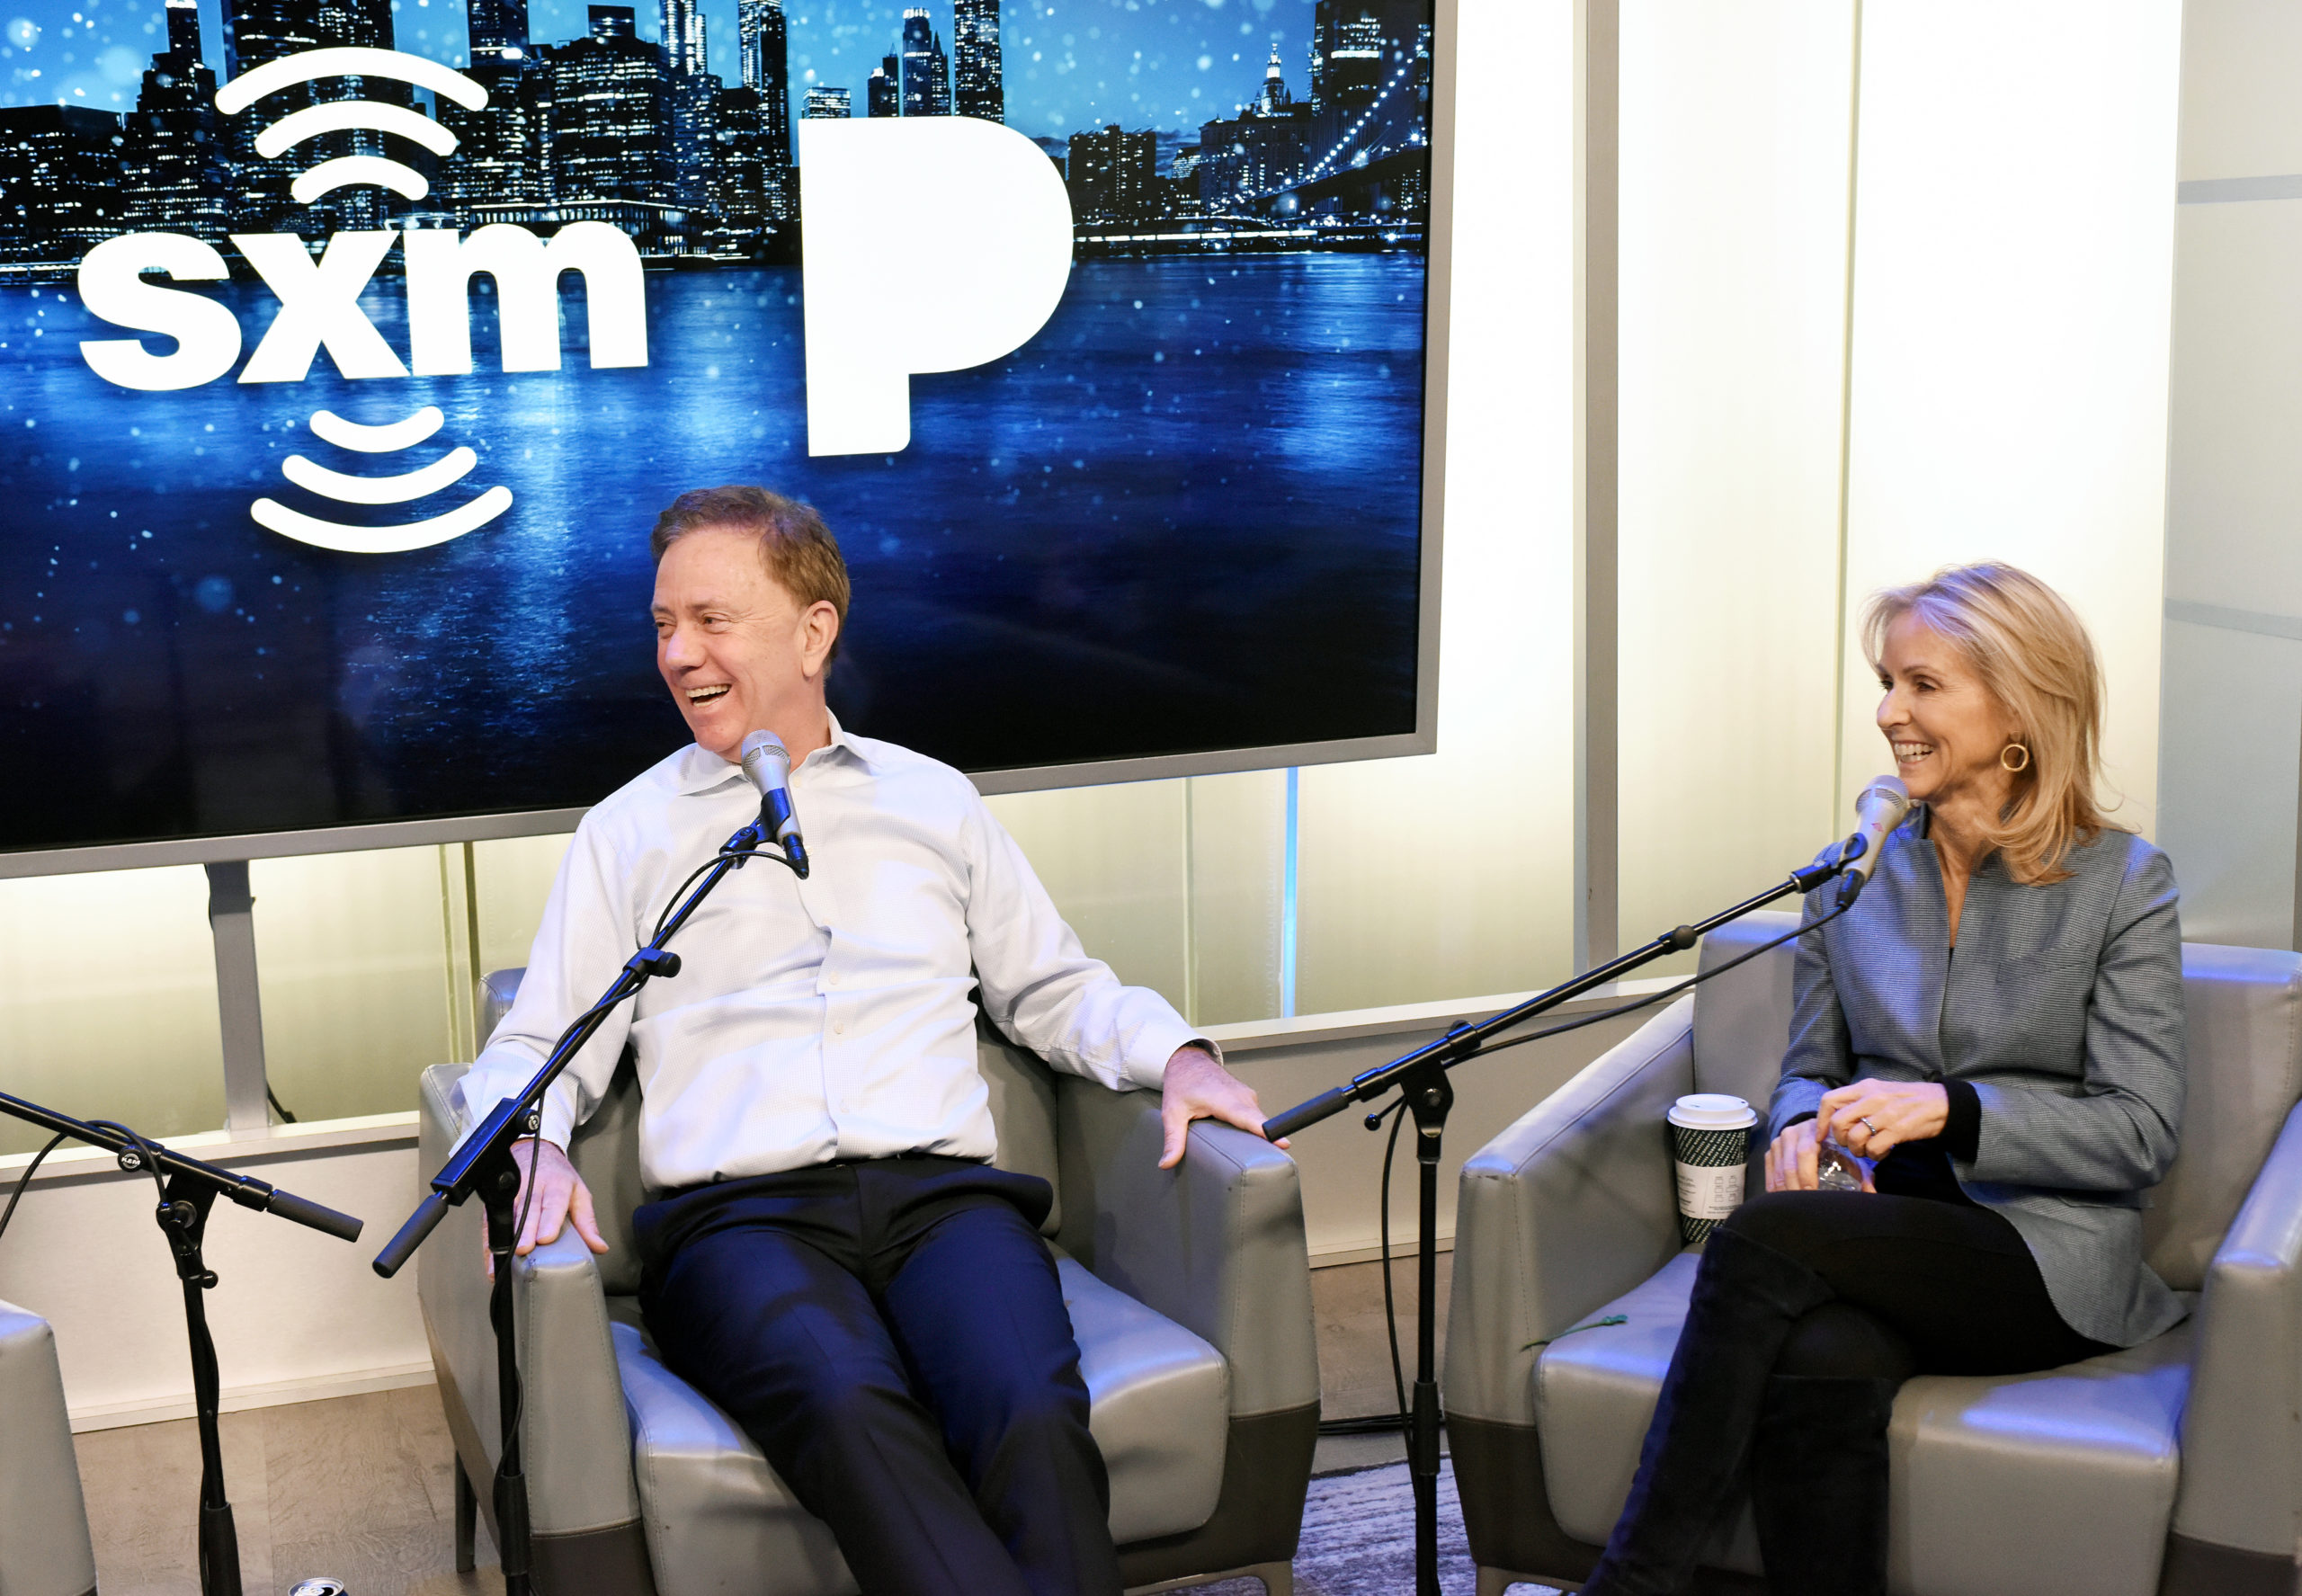 Connecticut Gov. Ned Lamont is interviewed on Dec. 20, 2019 in New York City. (Bonnie Biess/Getty Images for SiriusXM)